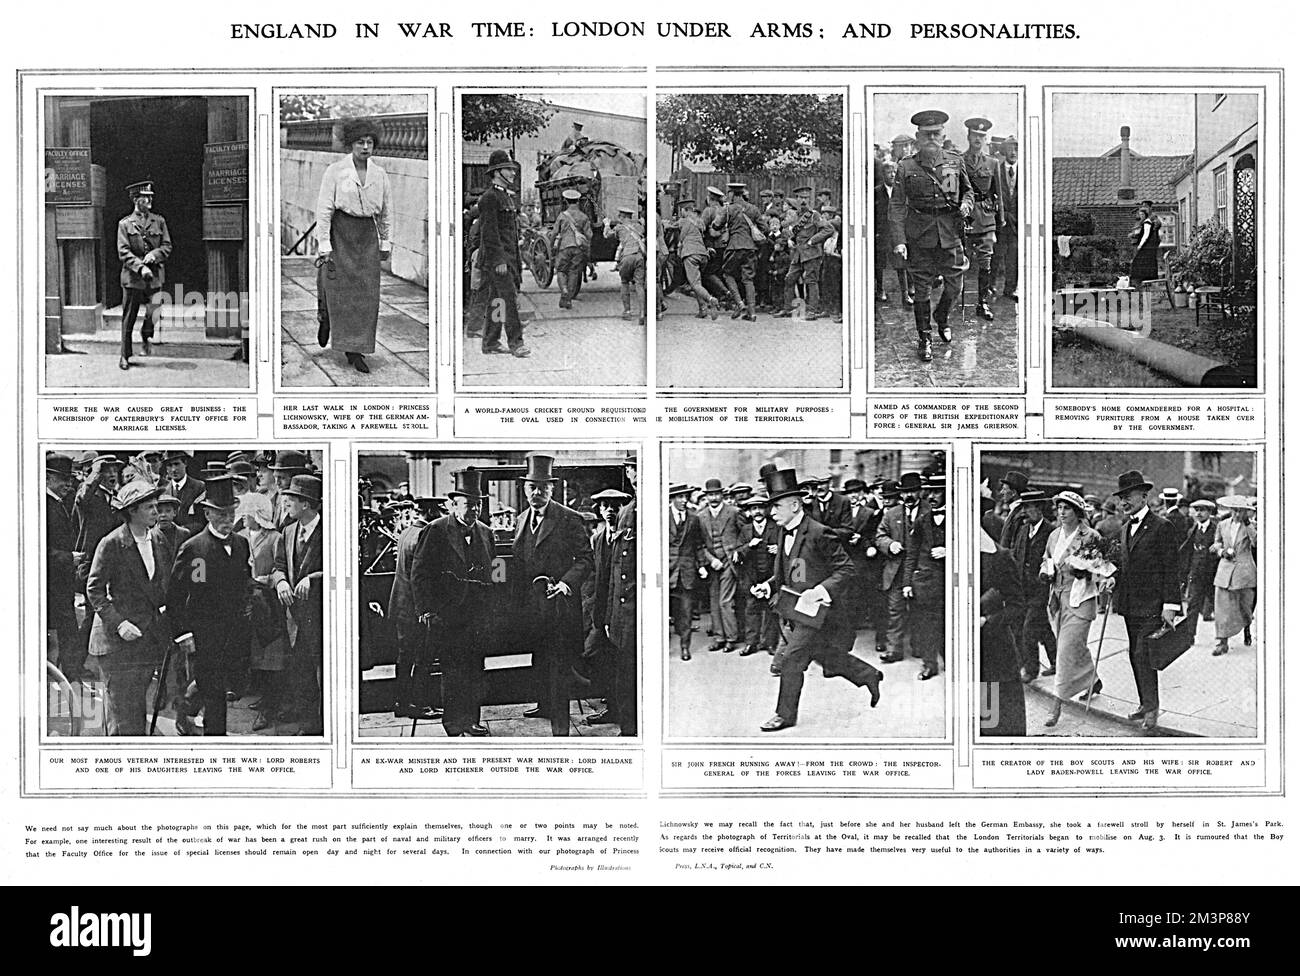 Events at the beginning of the First World War in England. Clockwise from top left: the Archbishop of Canterbury's Faculty for marriage licenses (many marriages had to be hastened as soldiers left for war); Princess Lichnovsky, wife of the German Ambassador, who had to leave Britain at the start of war with Germany, out for a final stroll; the Oval cricket ground used in connection with the mobilisation of the territorials; Gen. James Grierson, Commander of the Second Corps of the BEF; a house comandeered as a hospital; Sir Robert and Lady Baden-Powell leaving the war office; Sir John French, Stock Photo